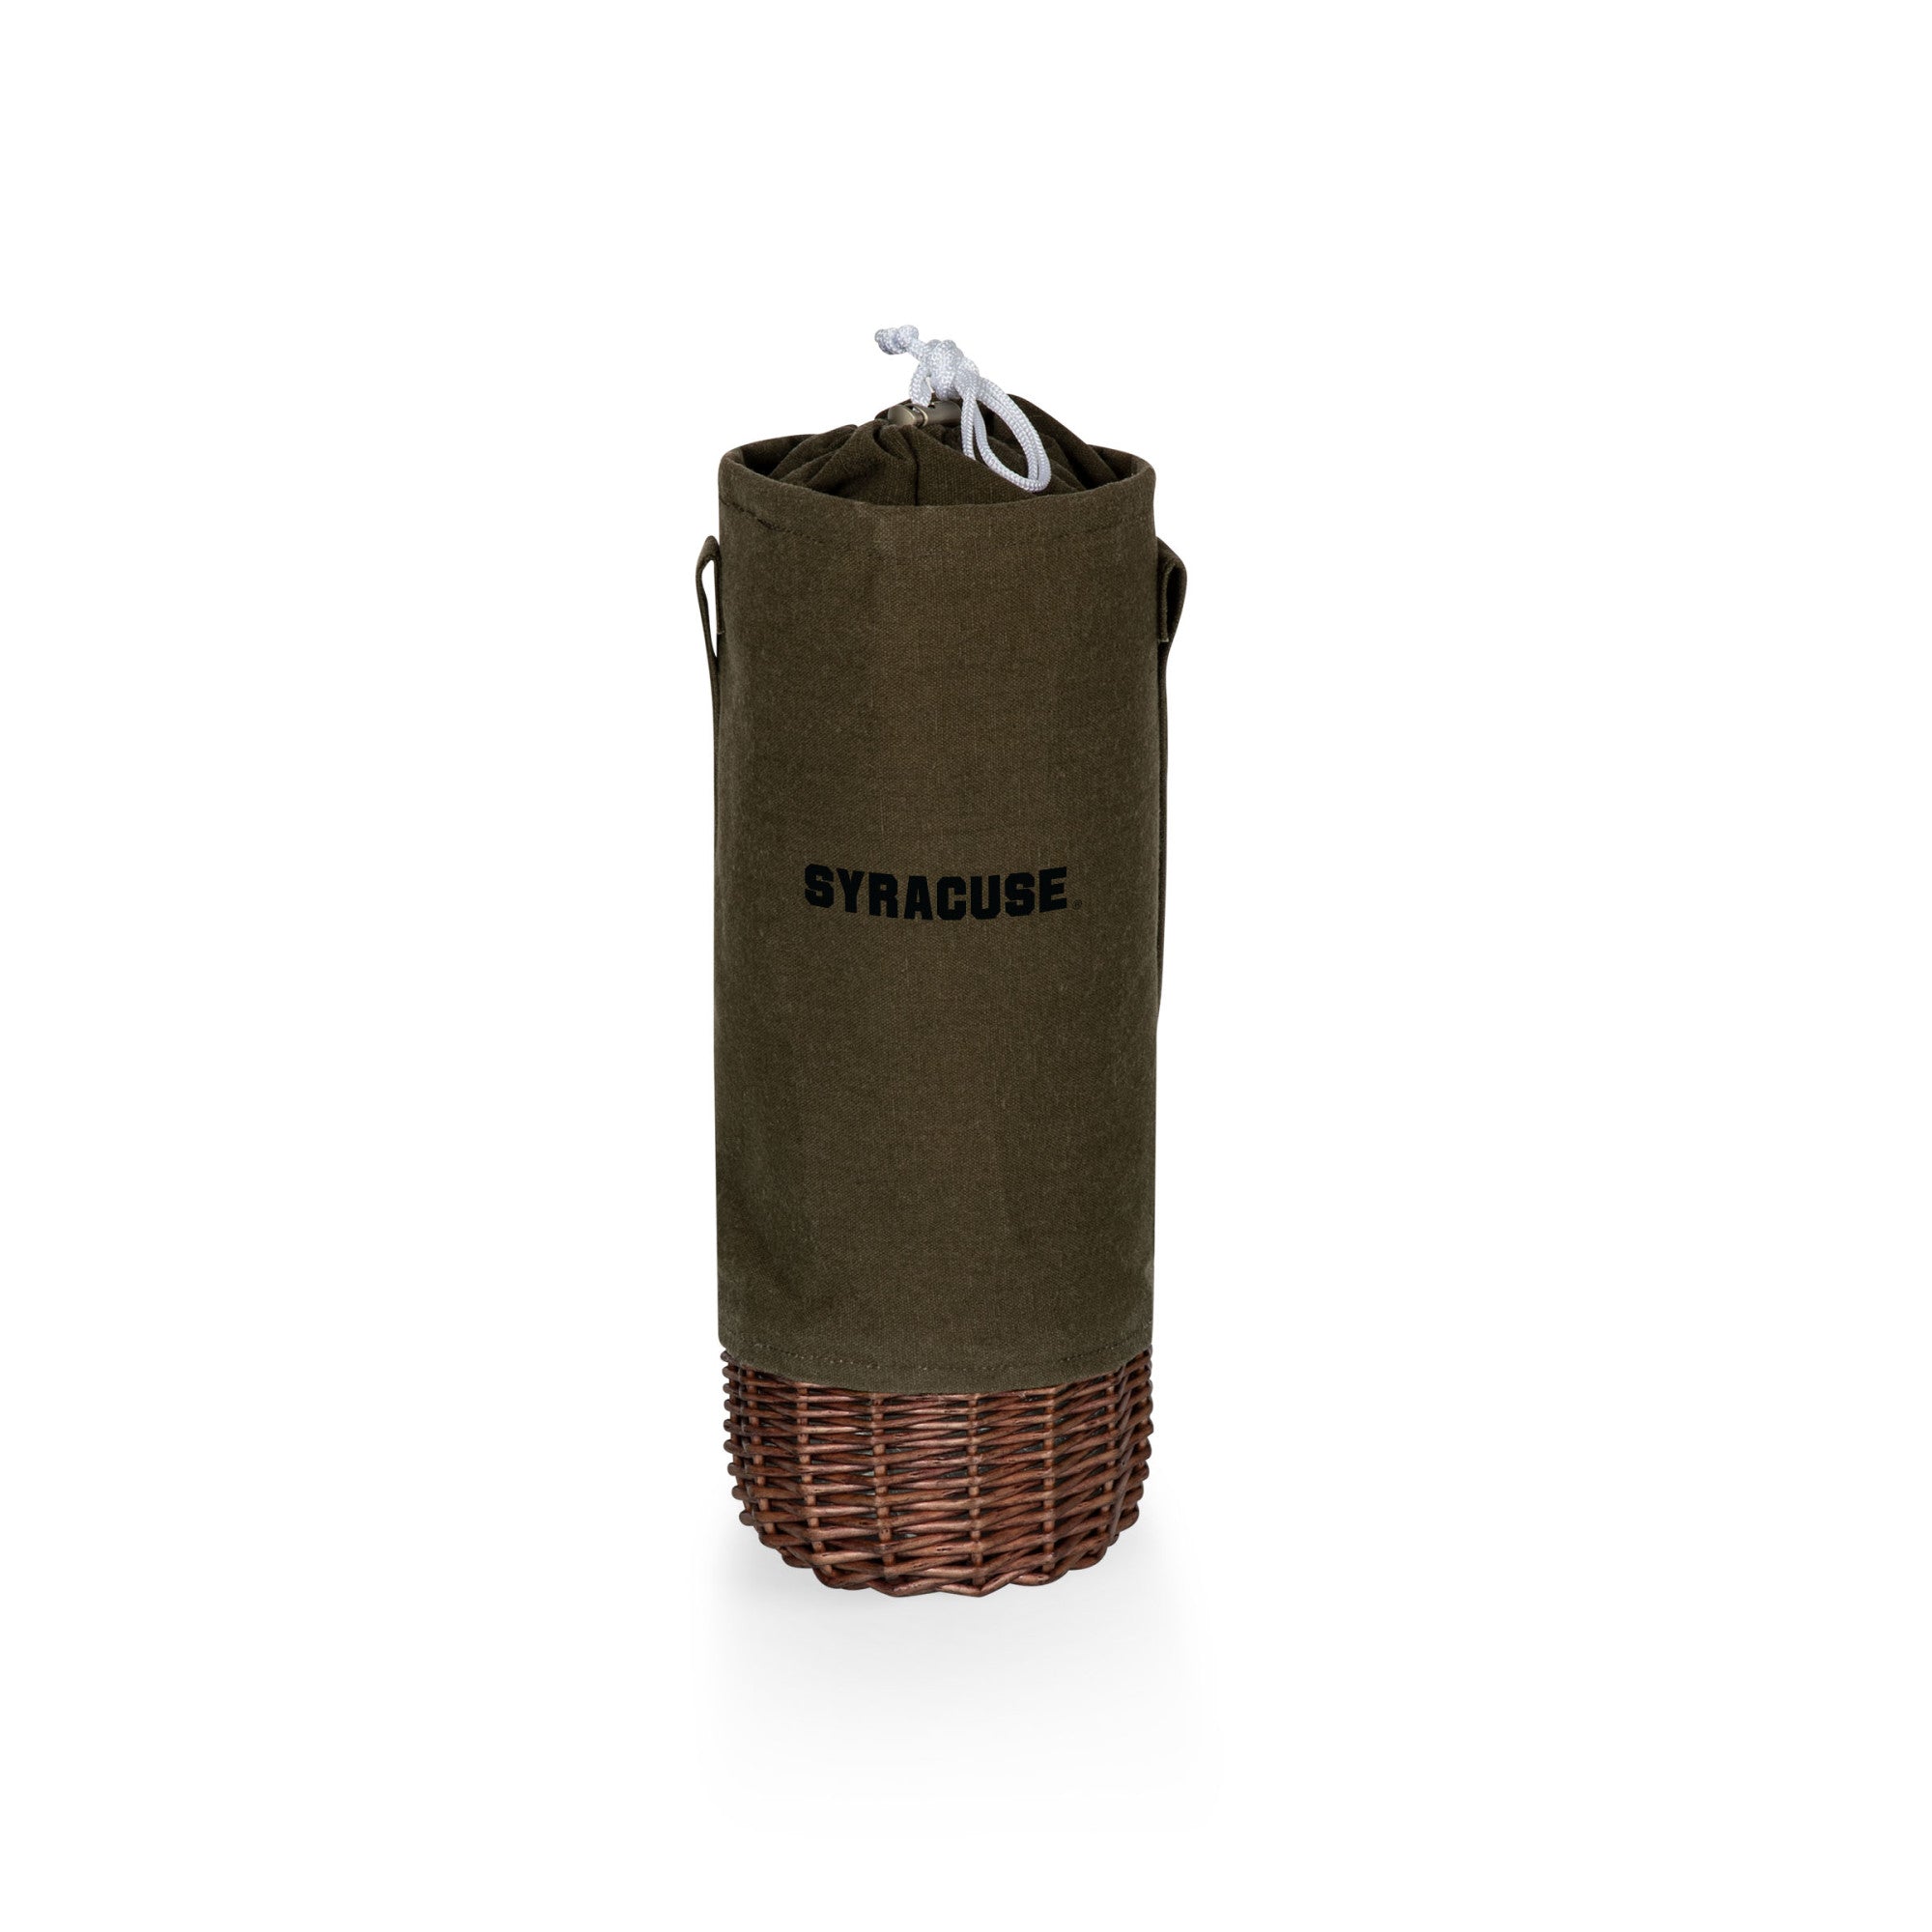 Syracuse Orange - Malbec Insulated Canvas and Willow Wine Bottle Basket